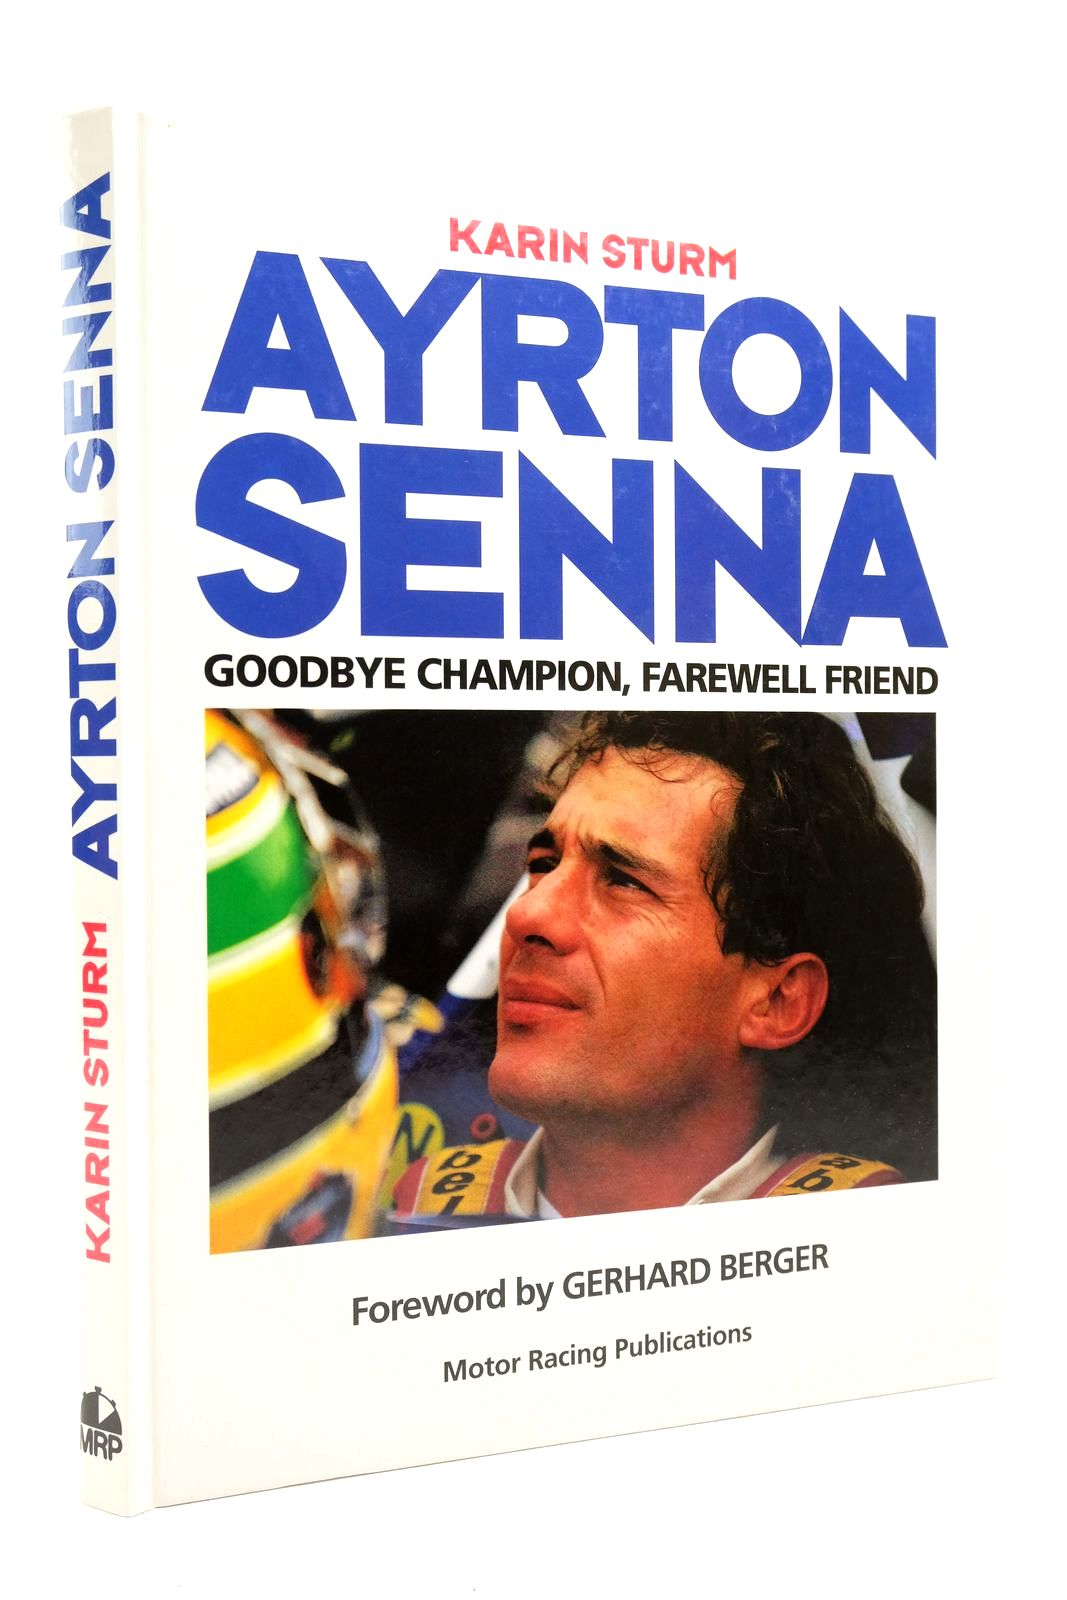 Photo of AYRTON SENNA GOODBYE CHAMPION FAREWELL FRIEND written by Sturm, Karin published by Motor Racing Publications Ltd. (STOCK CODE: 2140129)  for sale by Stella & Rose's Books